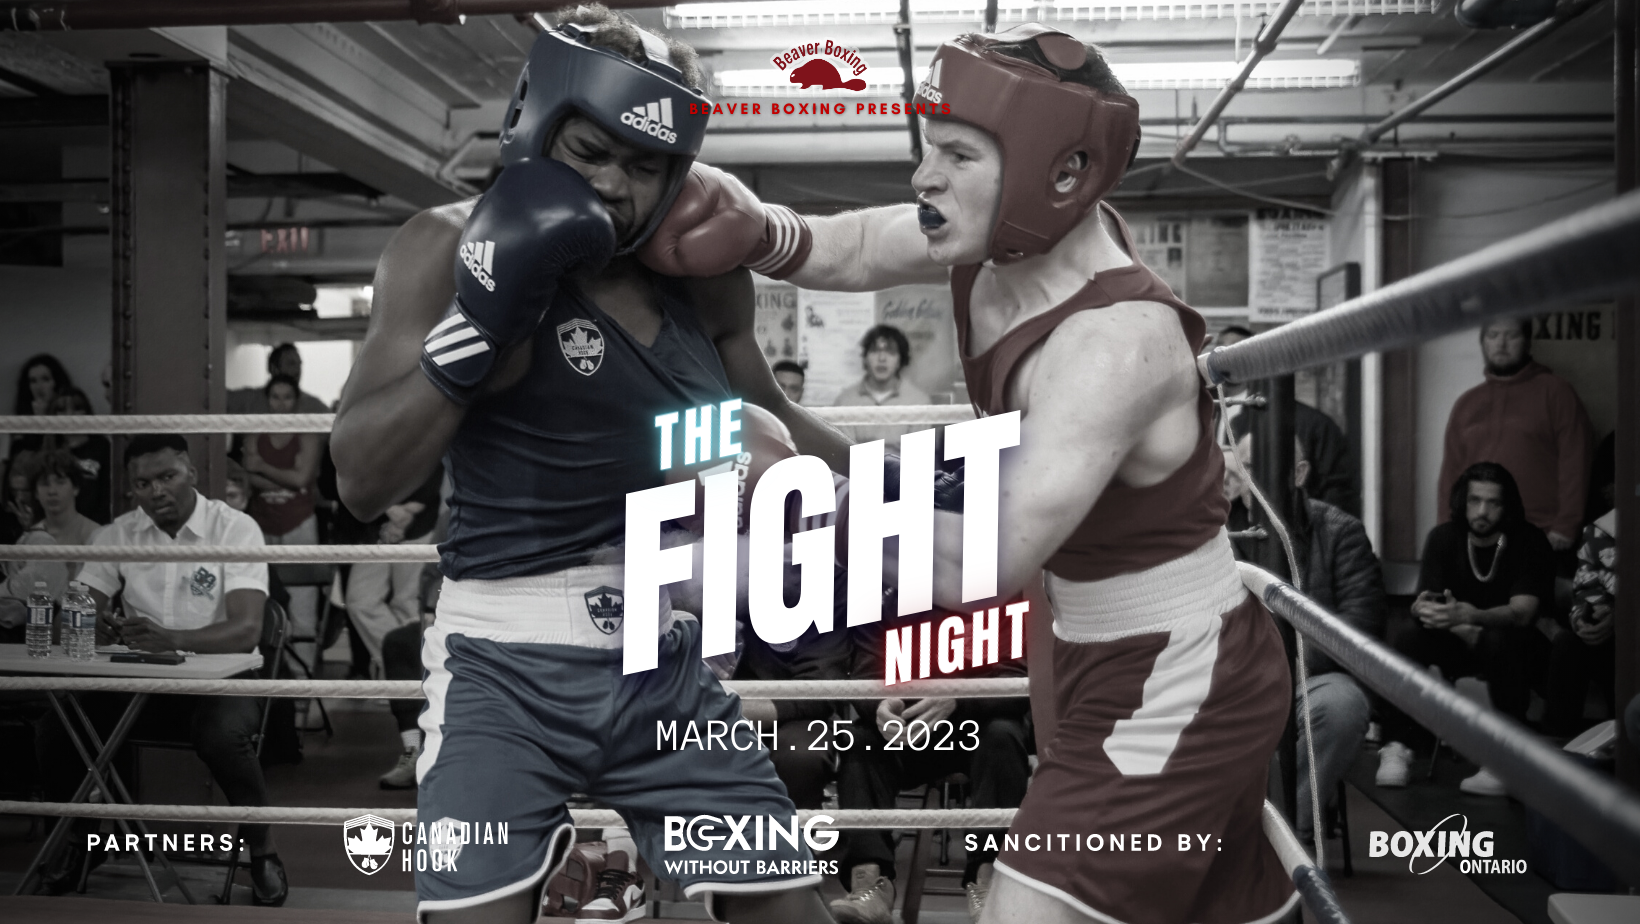 CLUB COMPETITION] The Fight Night: Presented by Beaver Boxing